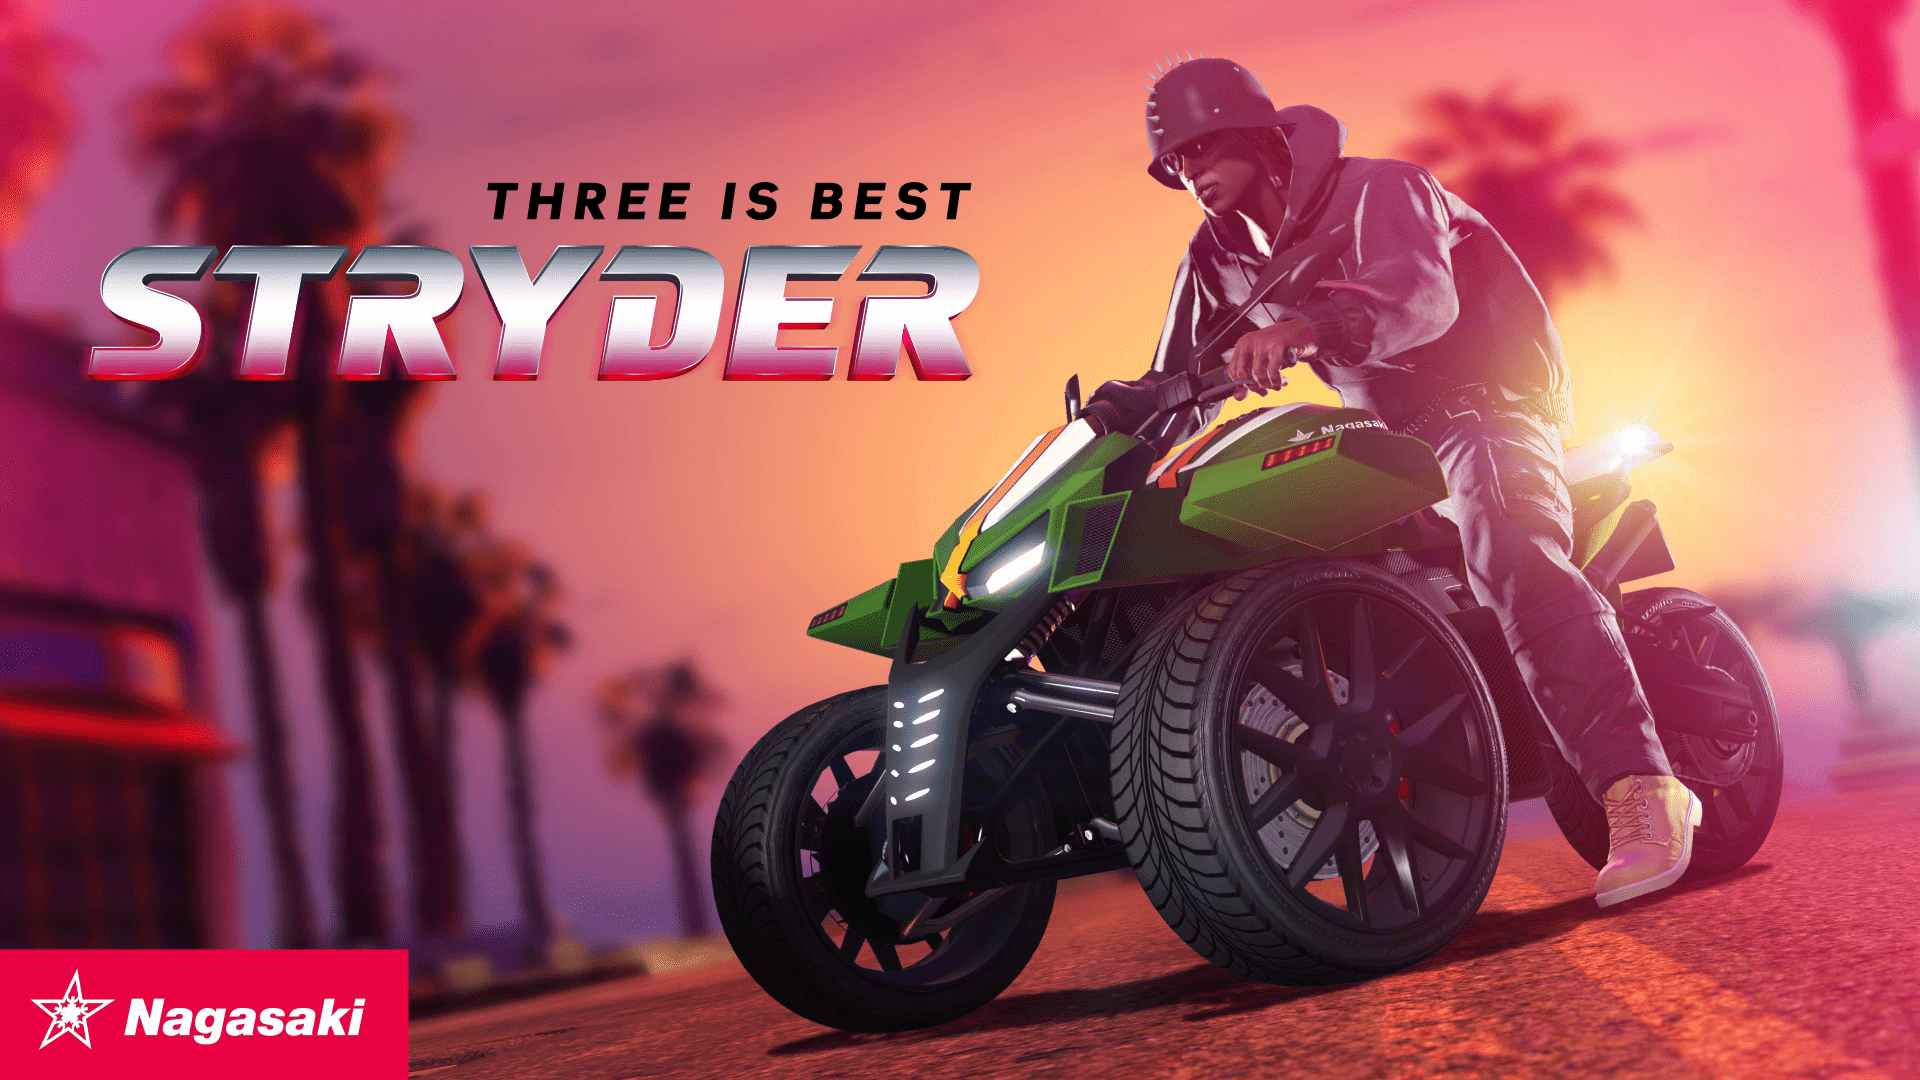 Nagasaki Stryder Now Available in GTA Online, Double Rewards on Gunrunning Sell Missions & more